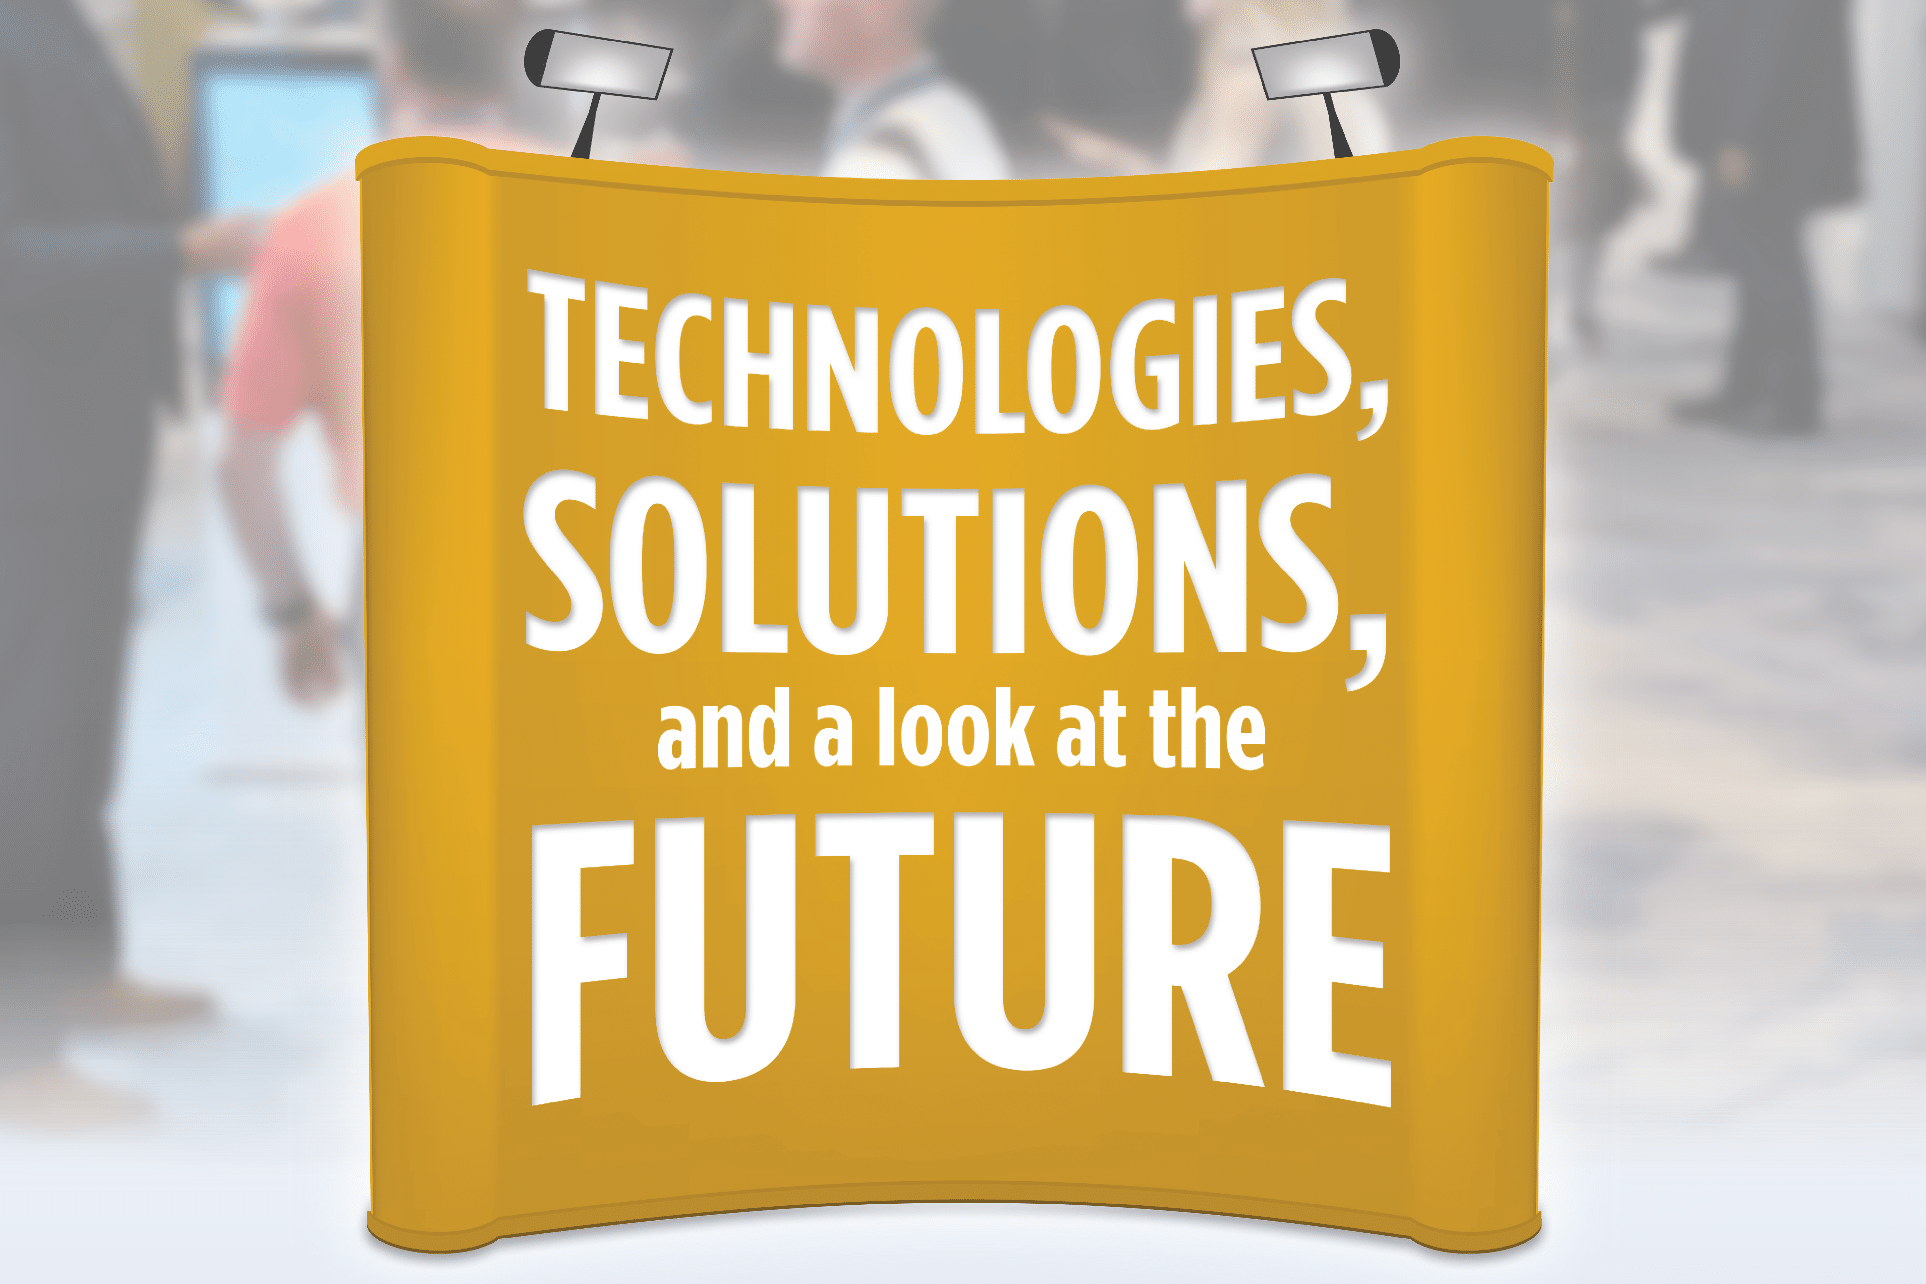 Technologies, solutions and a look at the future.